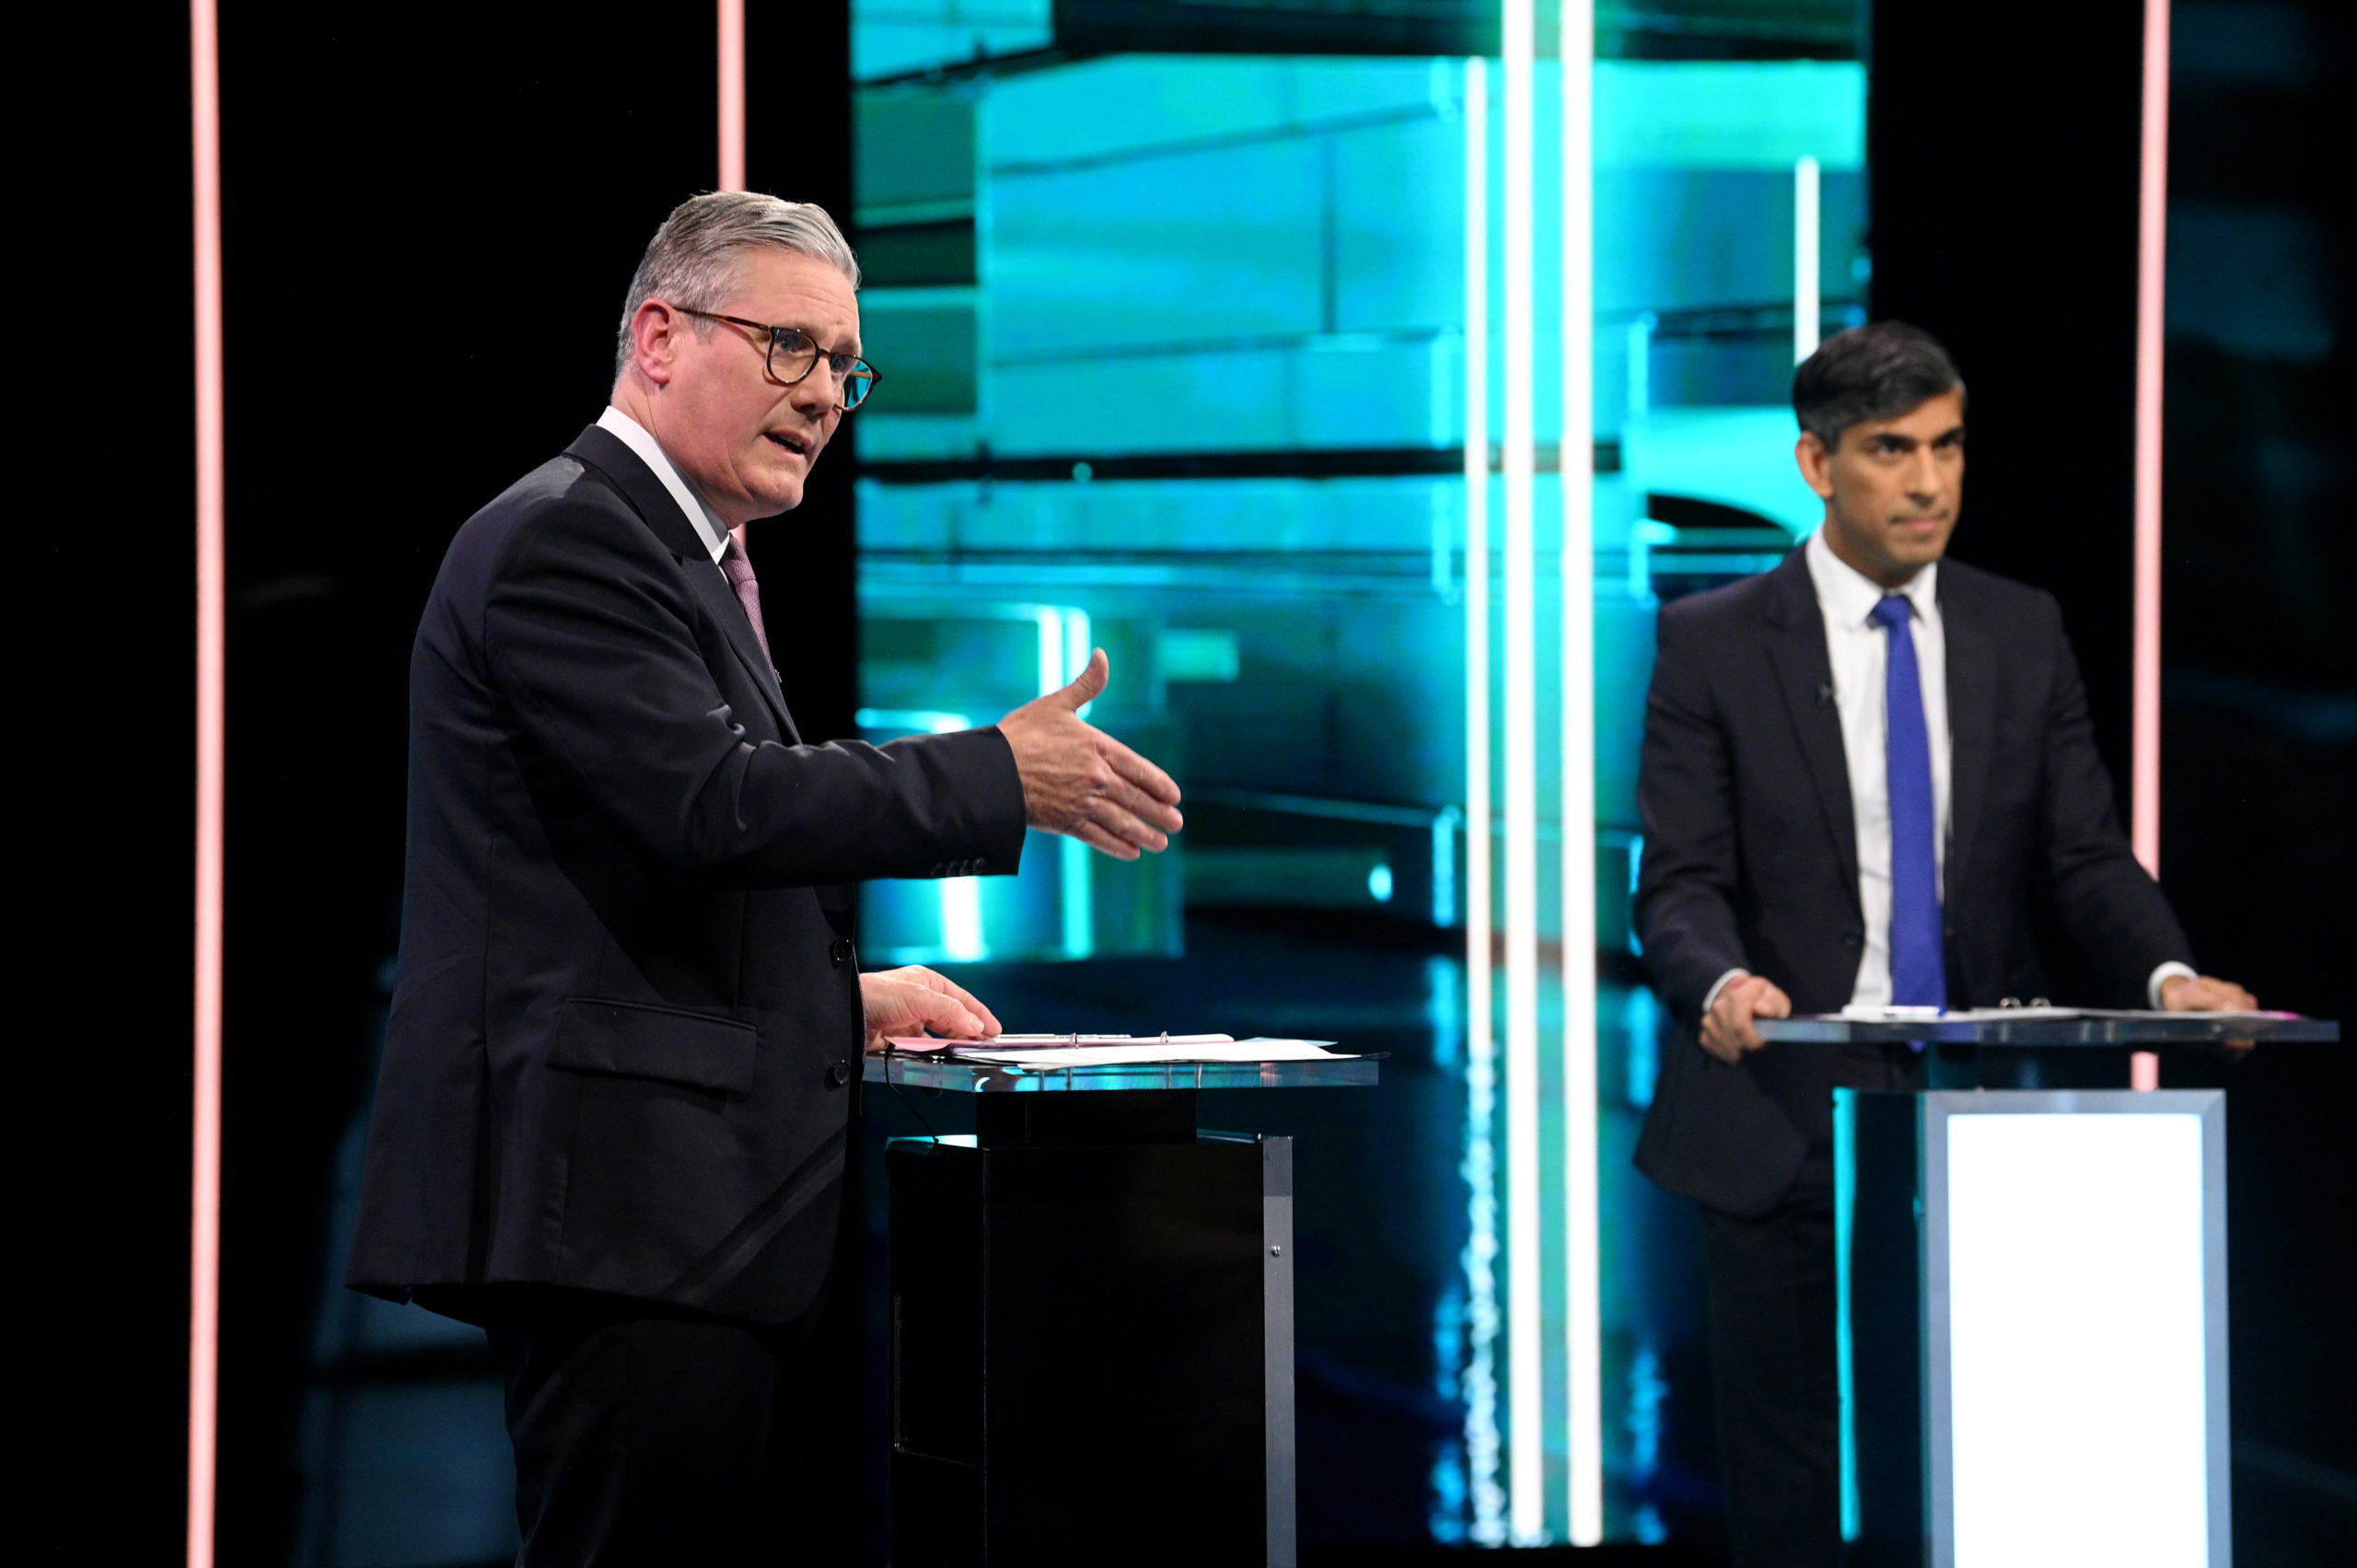 Rishi Sunak and Sir Keir Starmer will take place on ITV. (Photo by Jonathan Hordle - ITV via Getty Images)